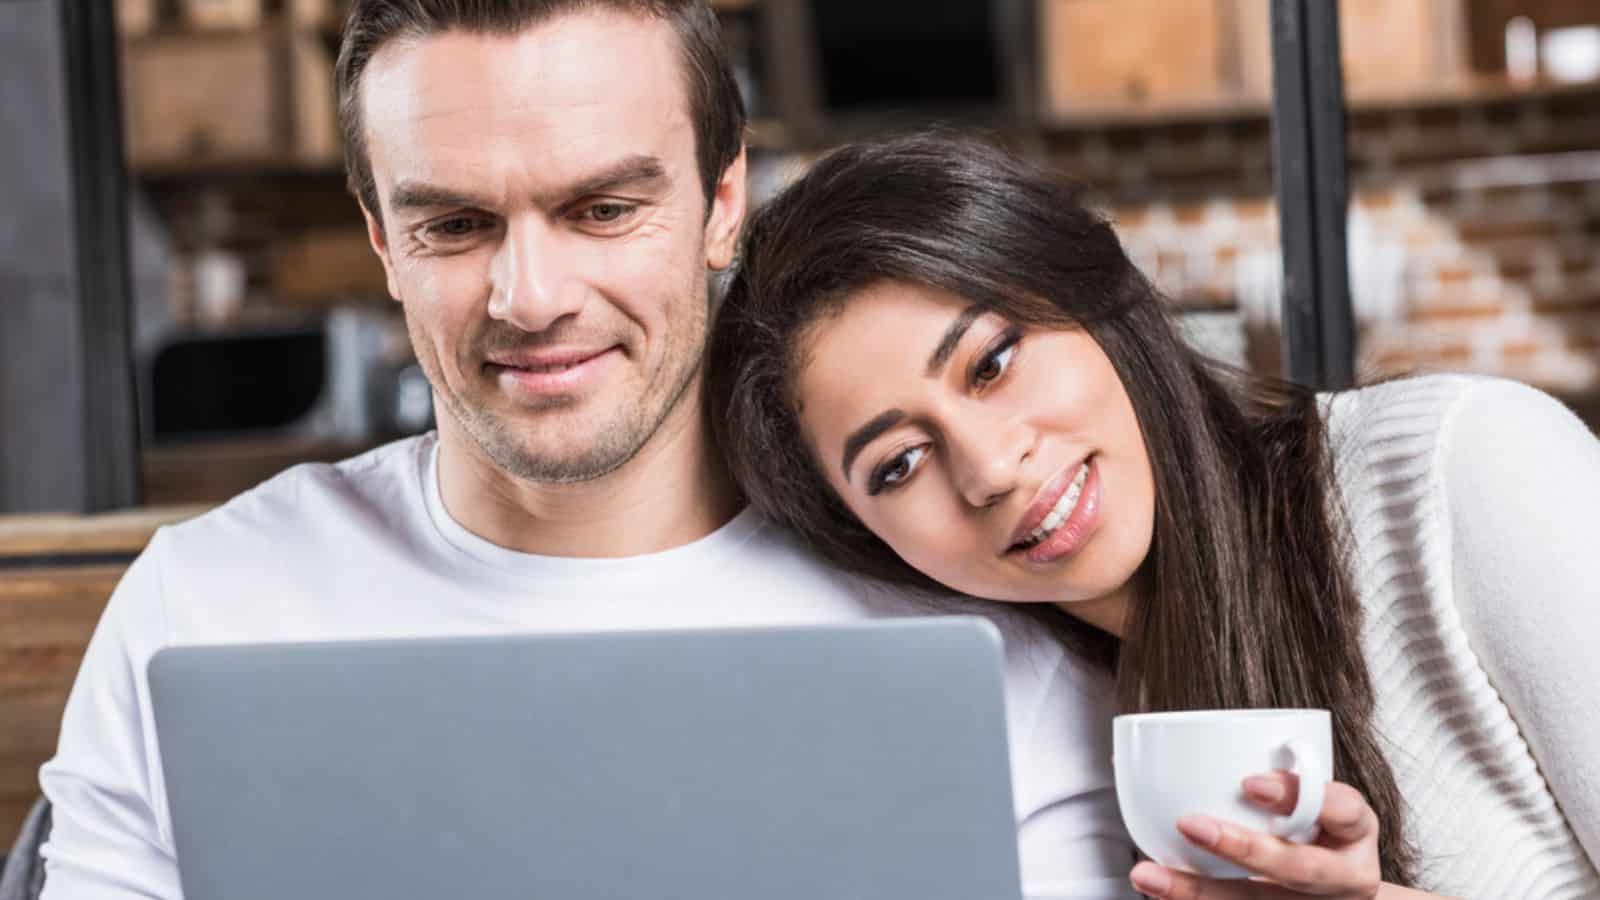 Smiling multiethnic couple using laptop together while woman drinking tea